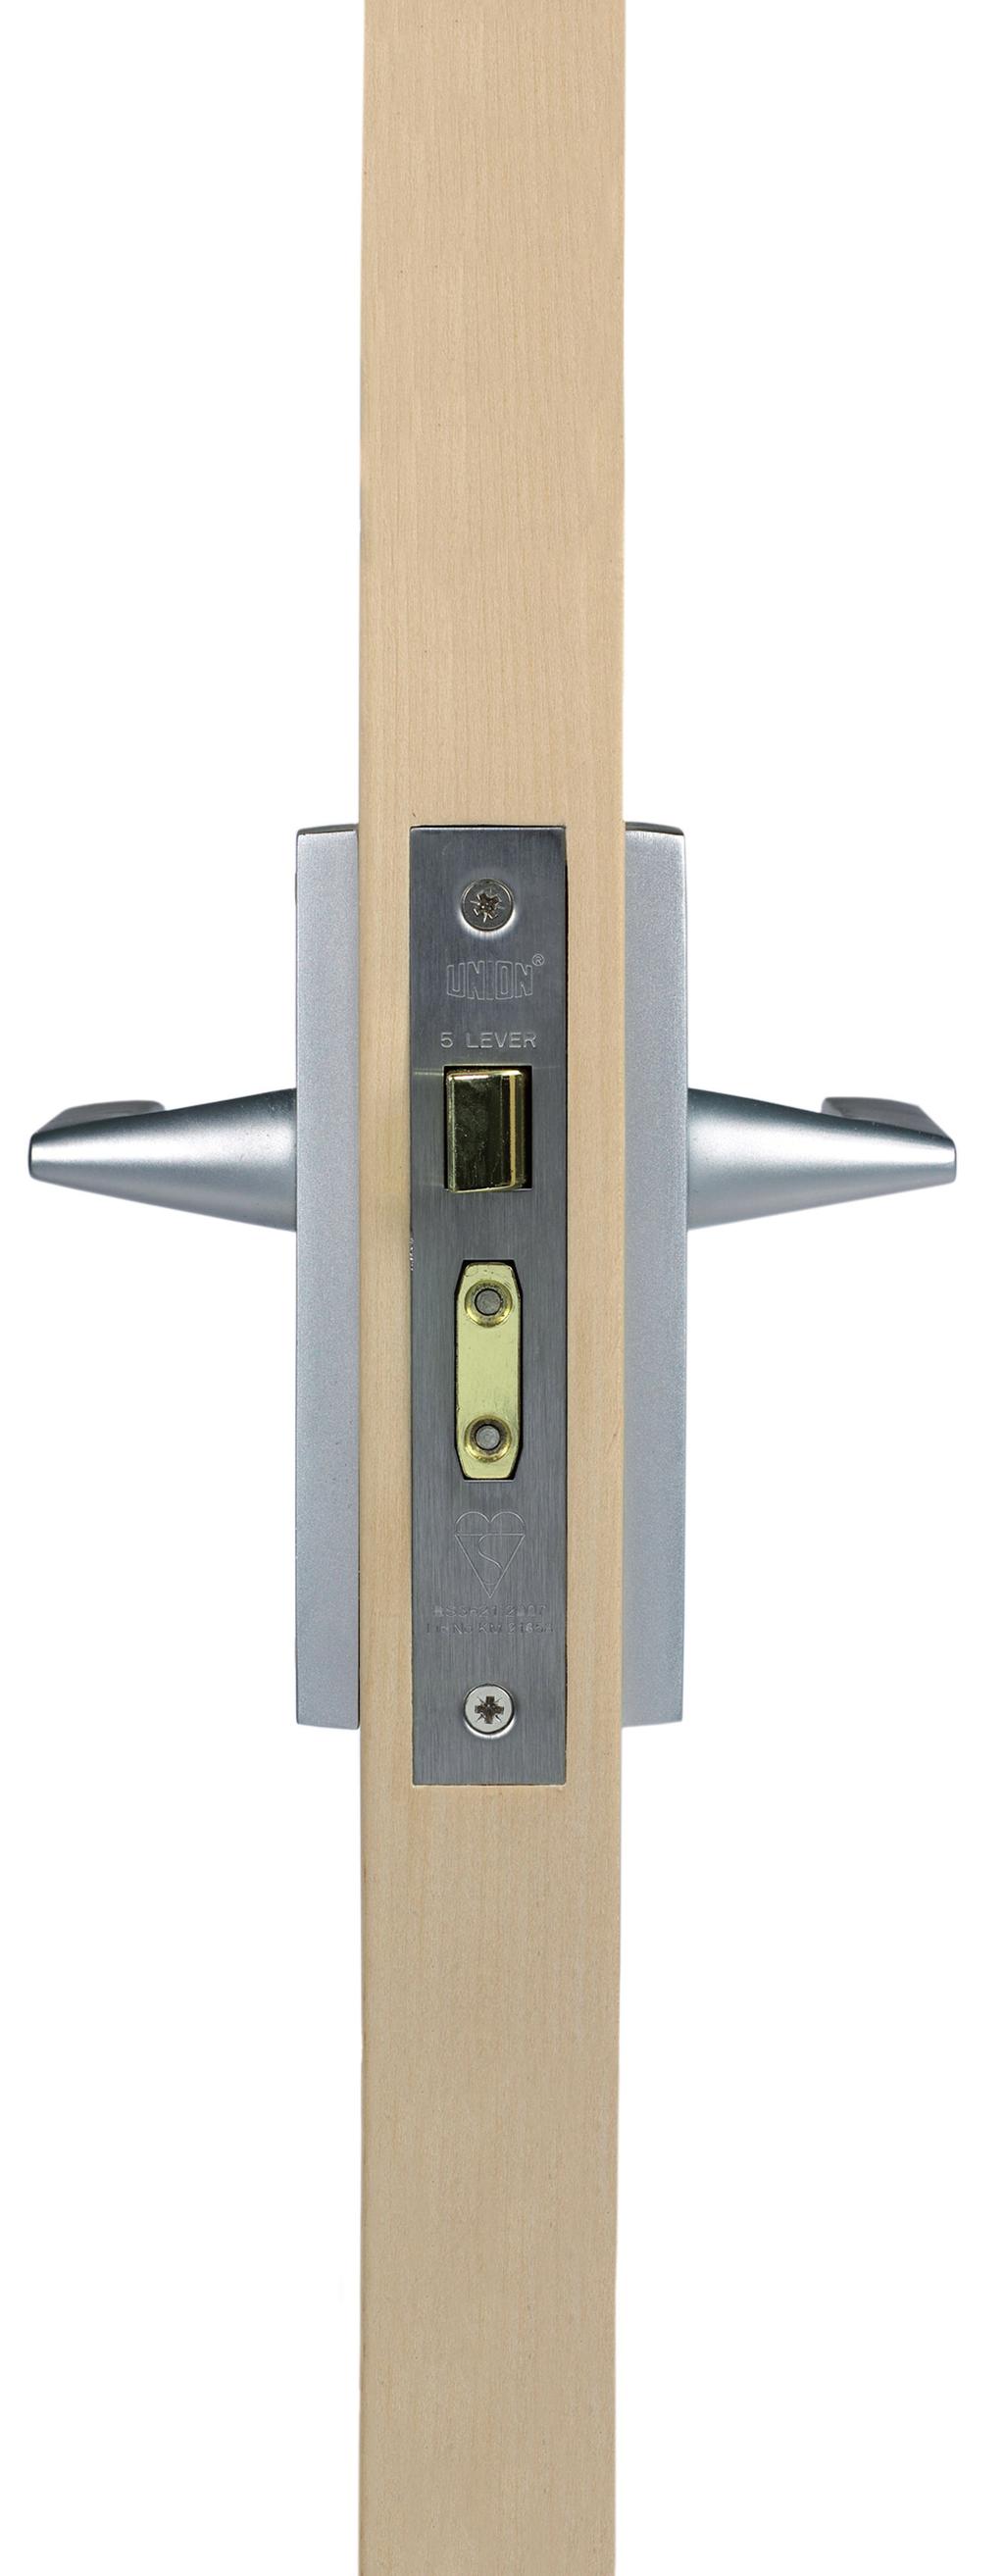 Technical Data Product Names StrongBOLT 2100S BS 5 Lever Deadlock StrongBOLT 2200S BS 5 Lever Sash lock Application For timber doors hinged on the left or right Keys suitable for doors up to 54mm